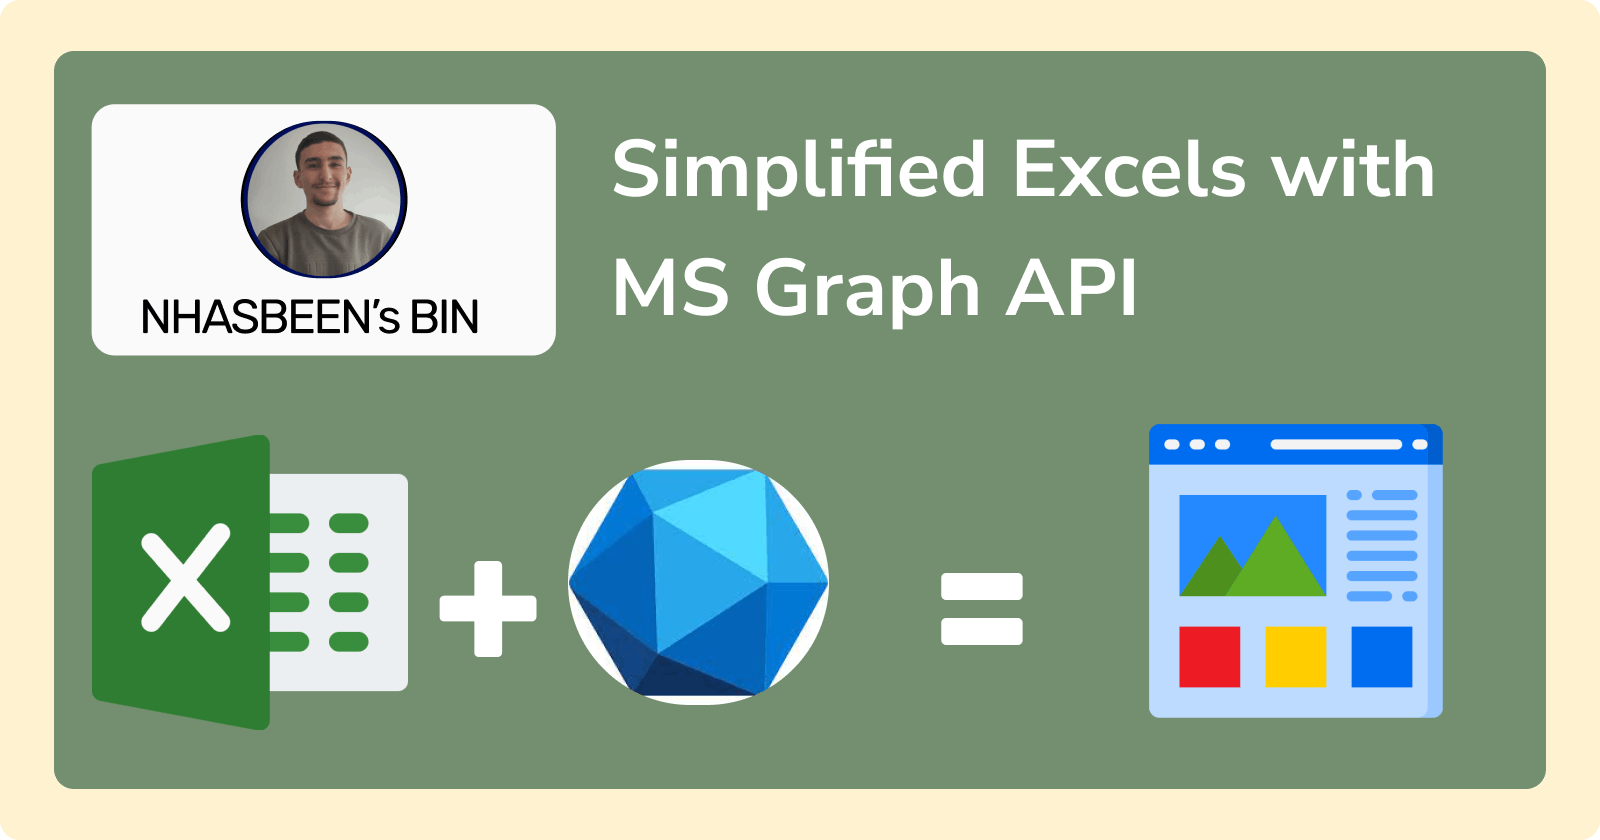 Simplified Excels with MS Graph API